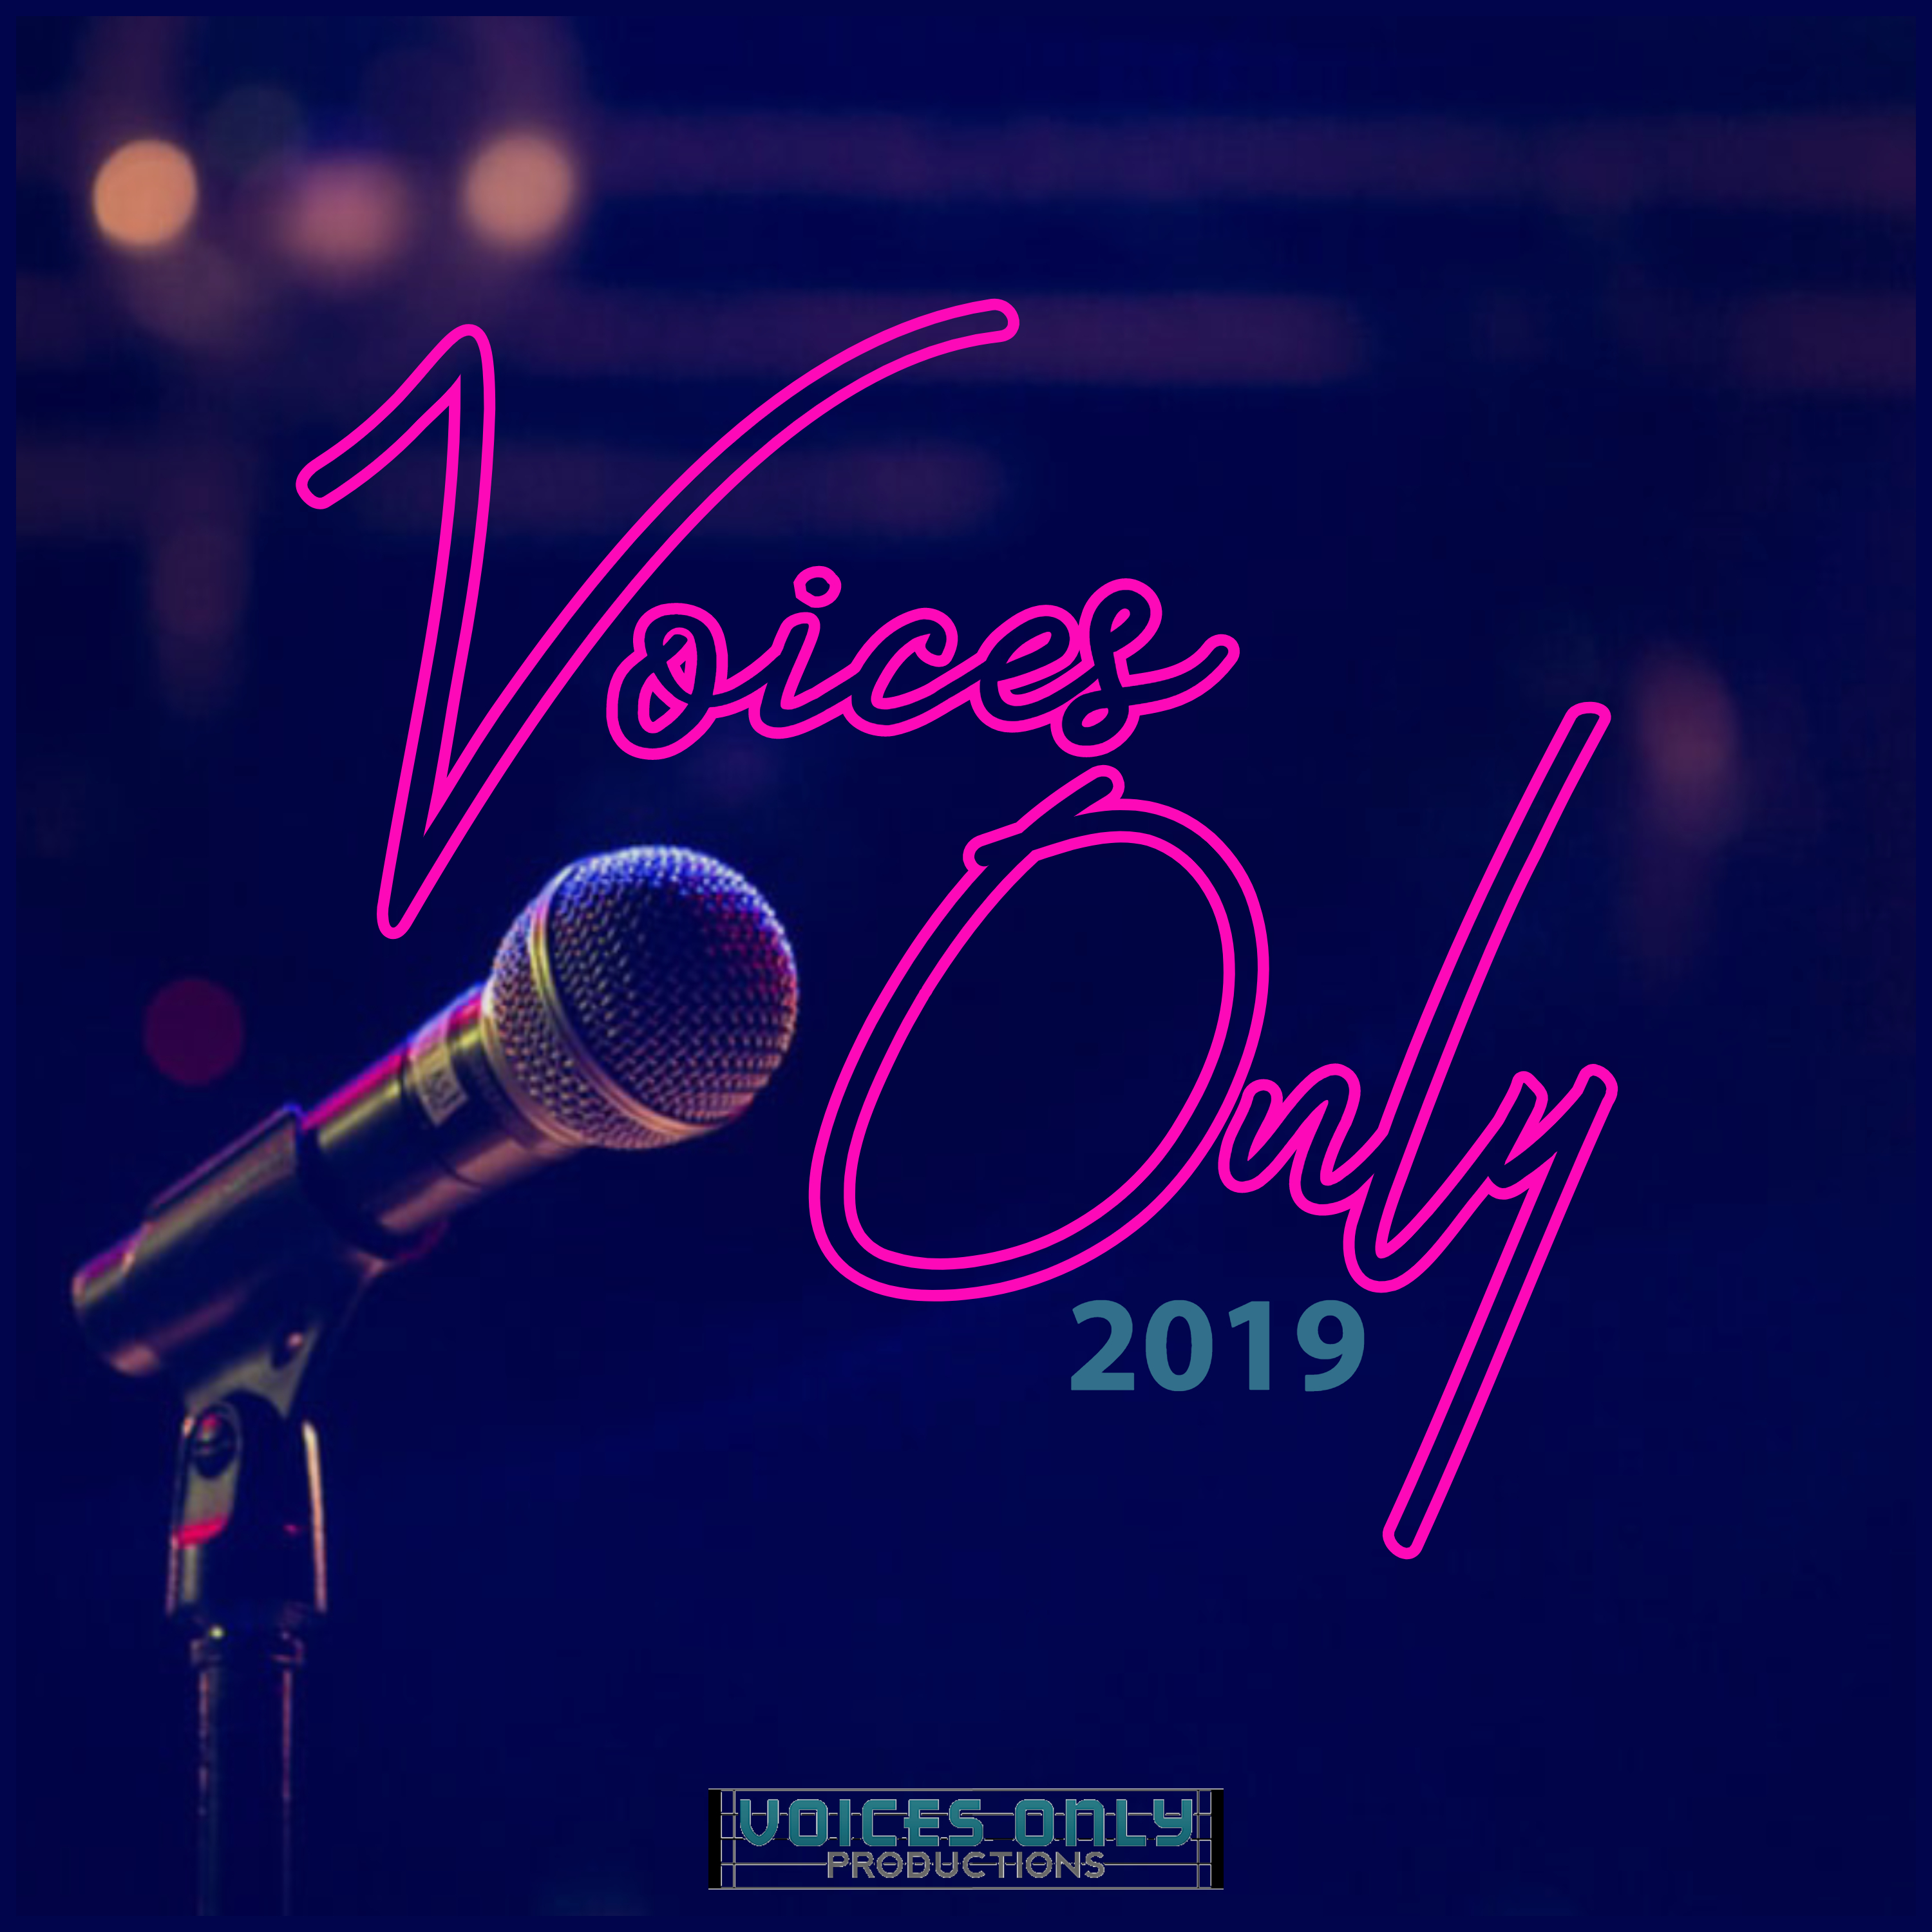 Download Voices Only 2019 now